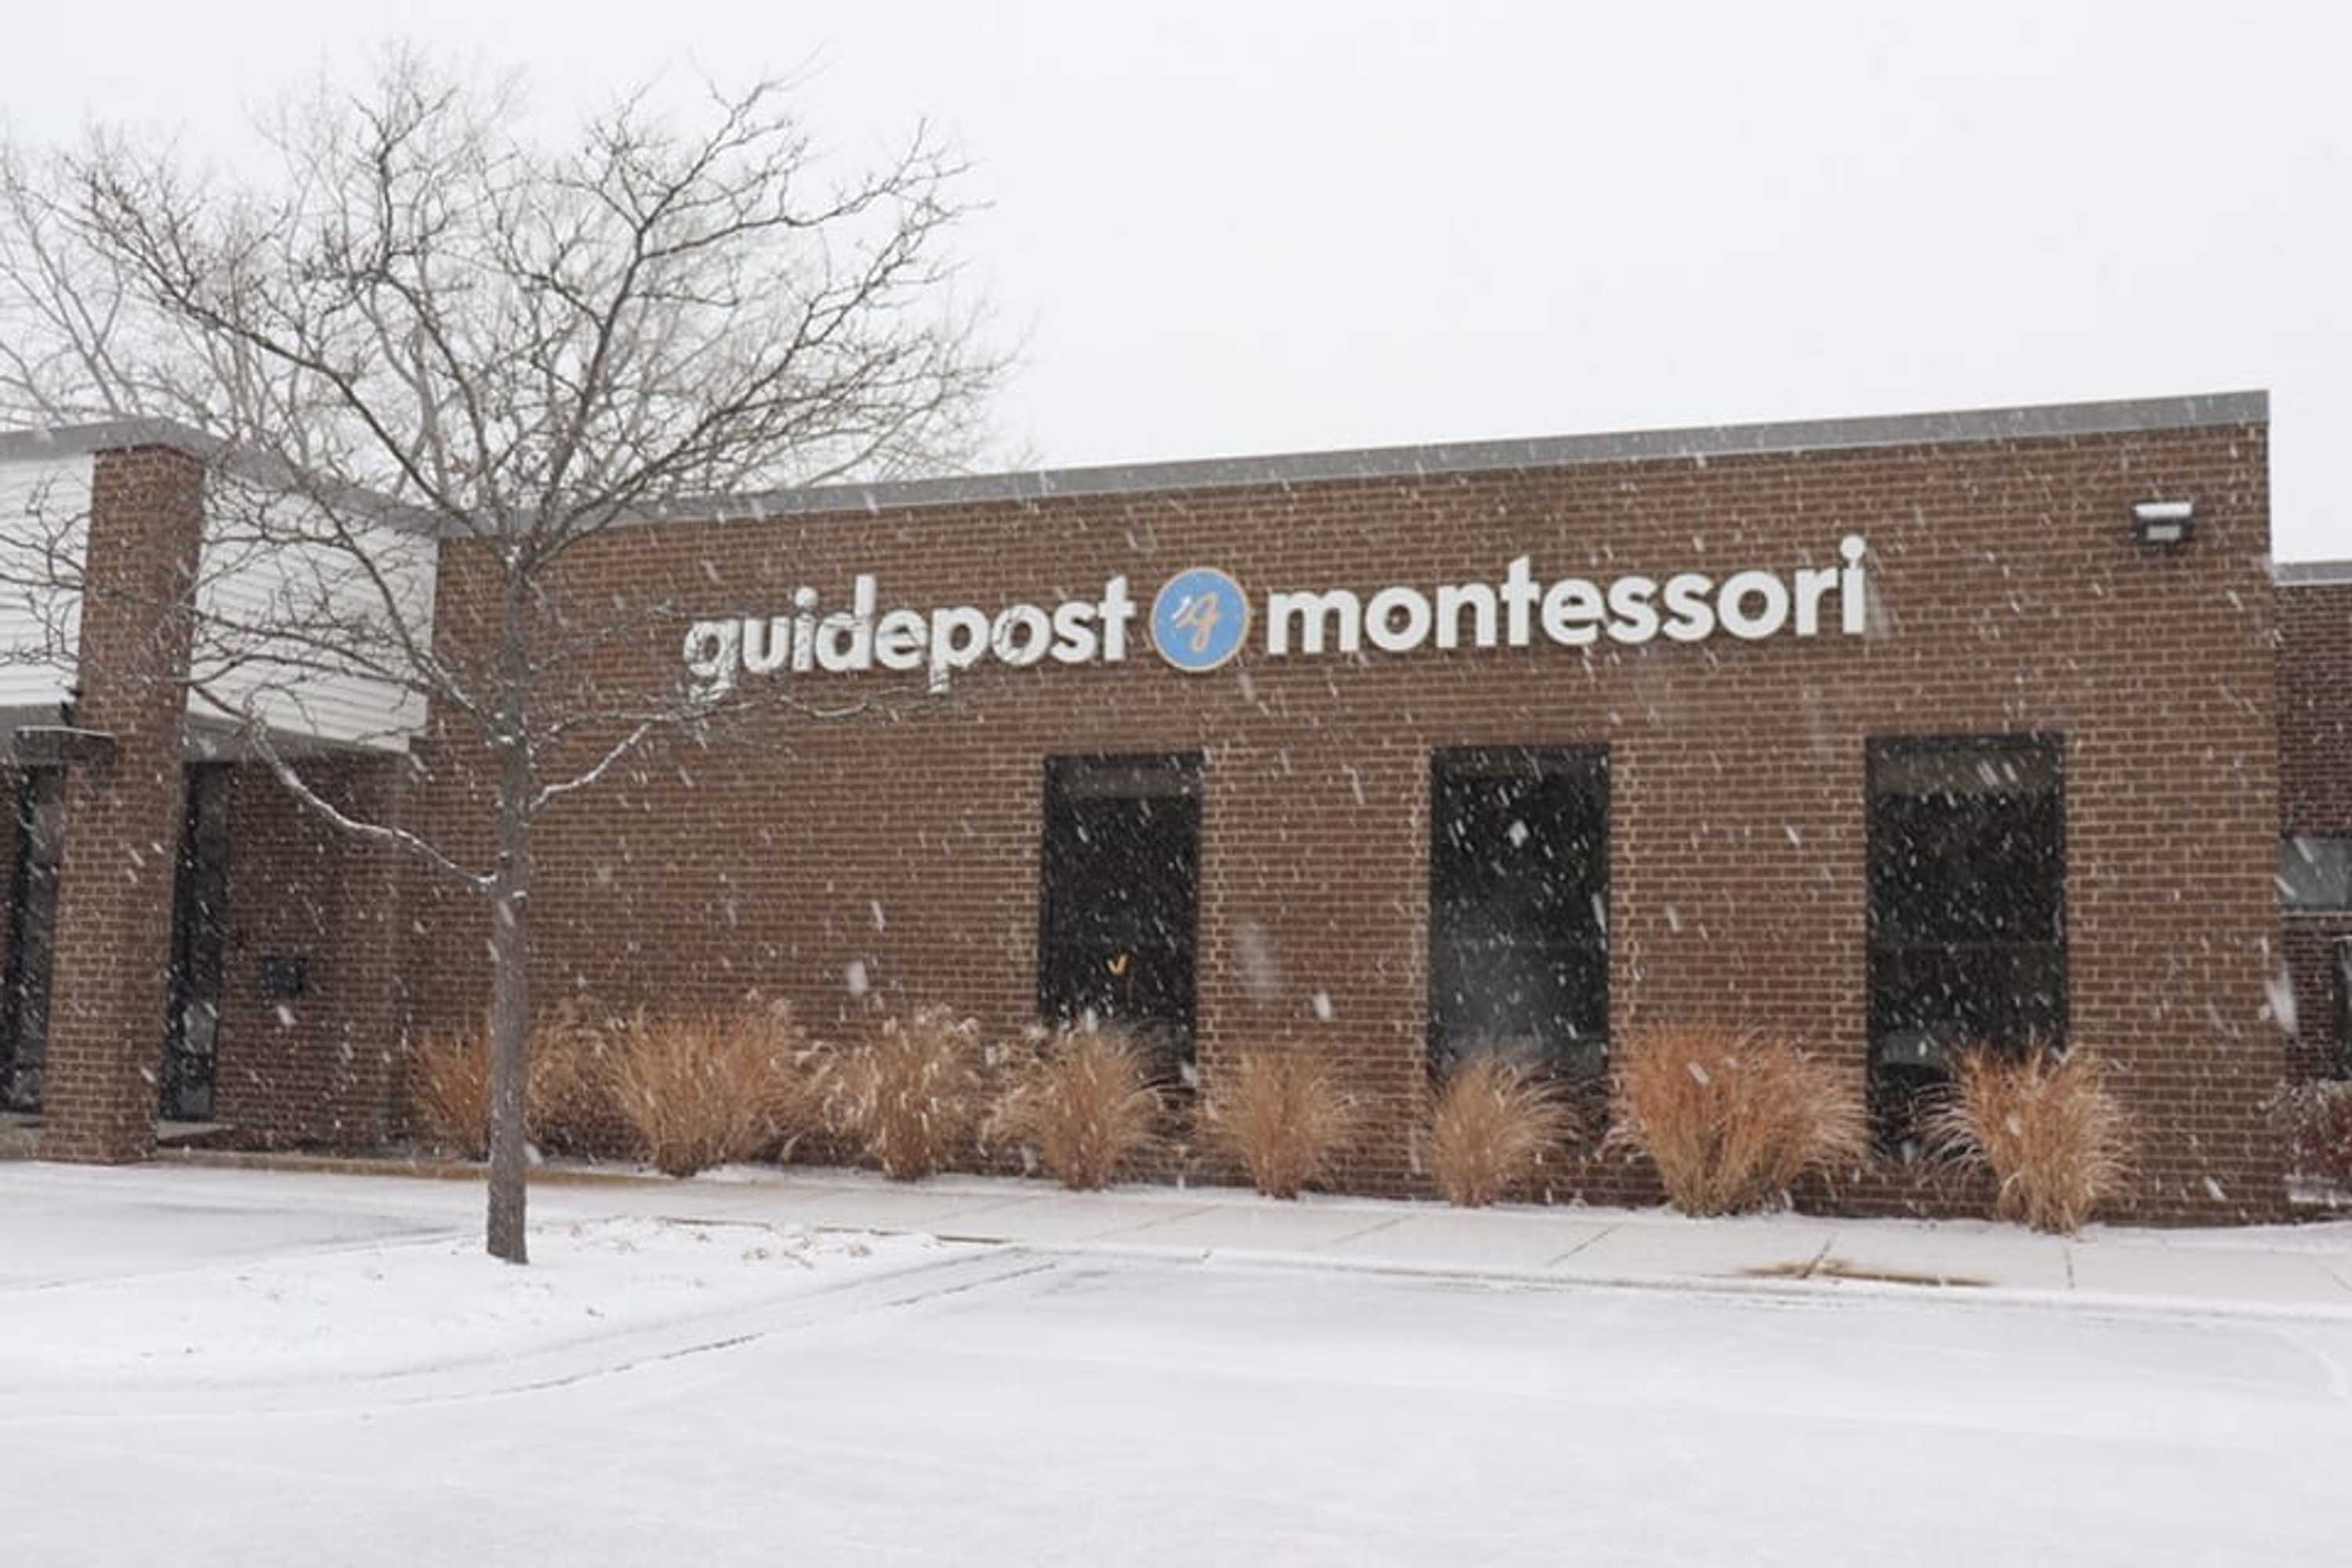 Close-Up view of Guidepost Montessori at Schaumburg that shows the brick exterior and 3 exterior windows as well as a branded Guidepost Montessori sign. Blue skies loom in the background.